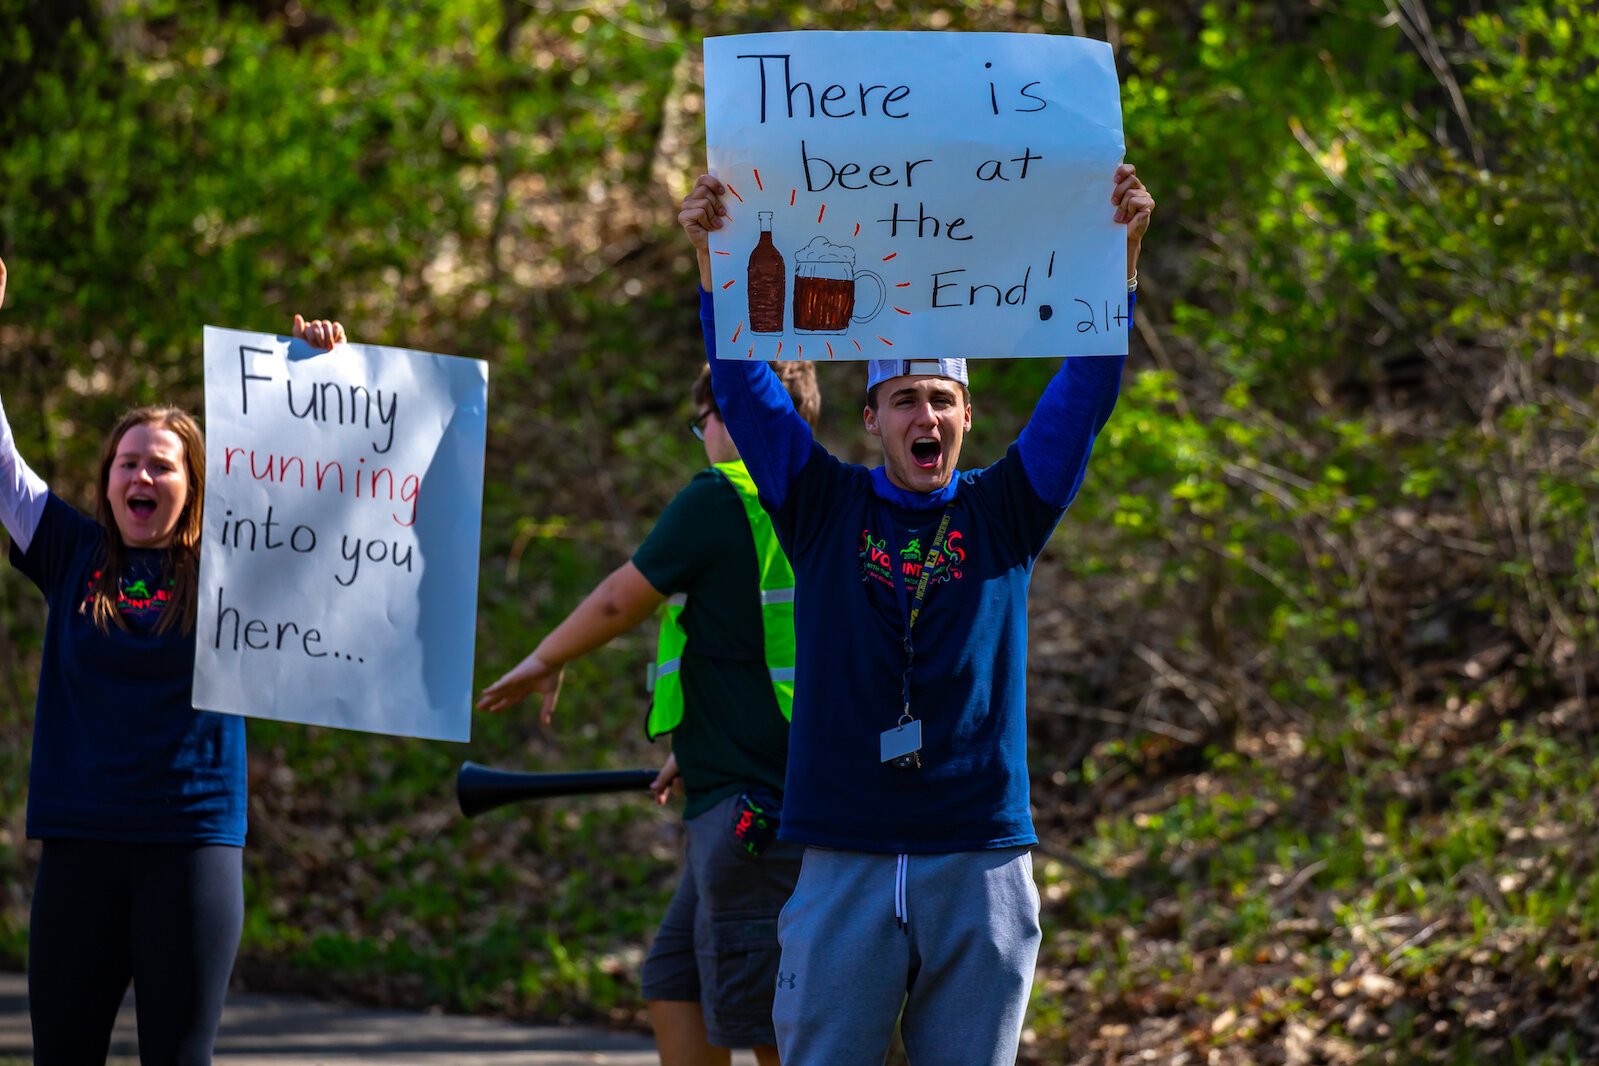 Enthusiastic supporters at the 2019 marathon encourage runners with the promise of a cold beer at the end.